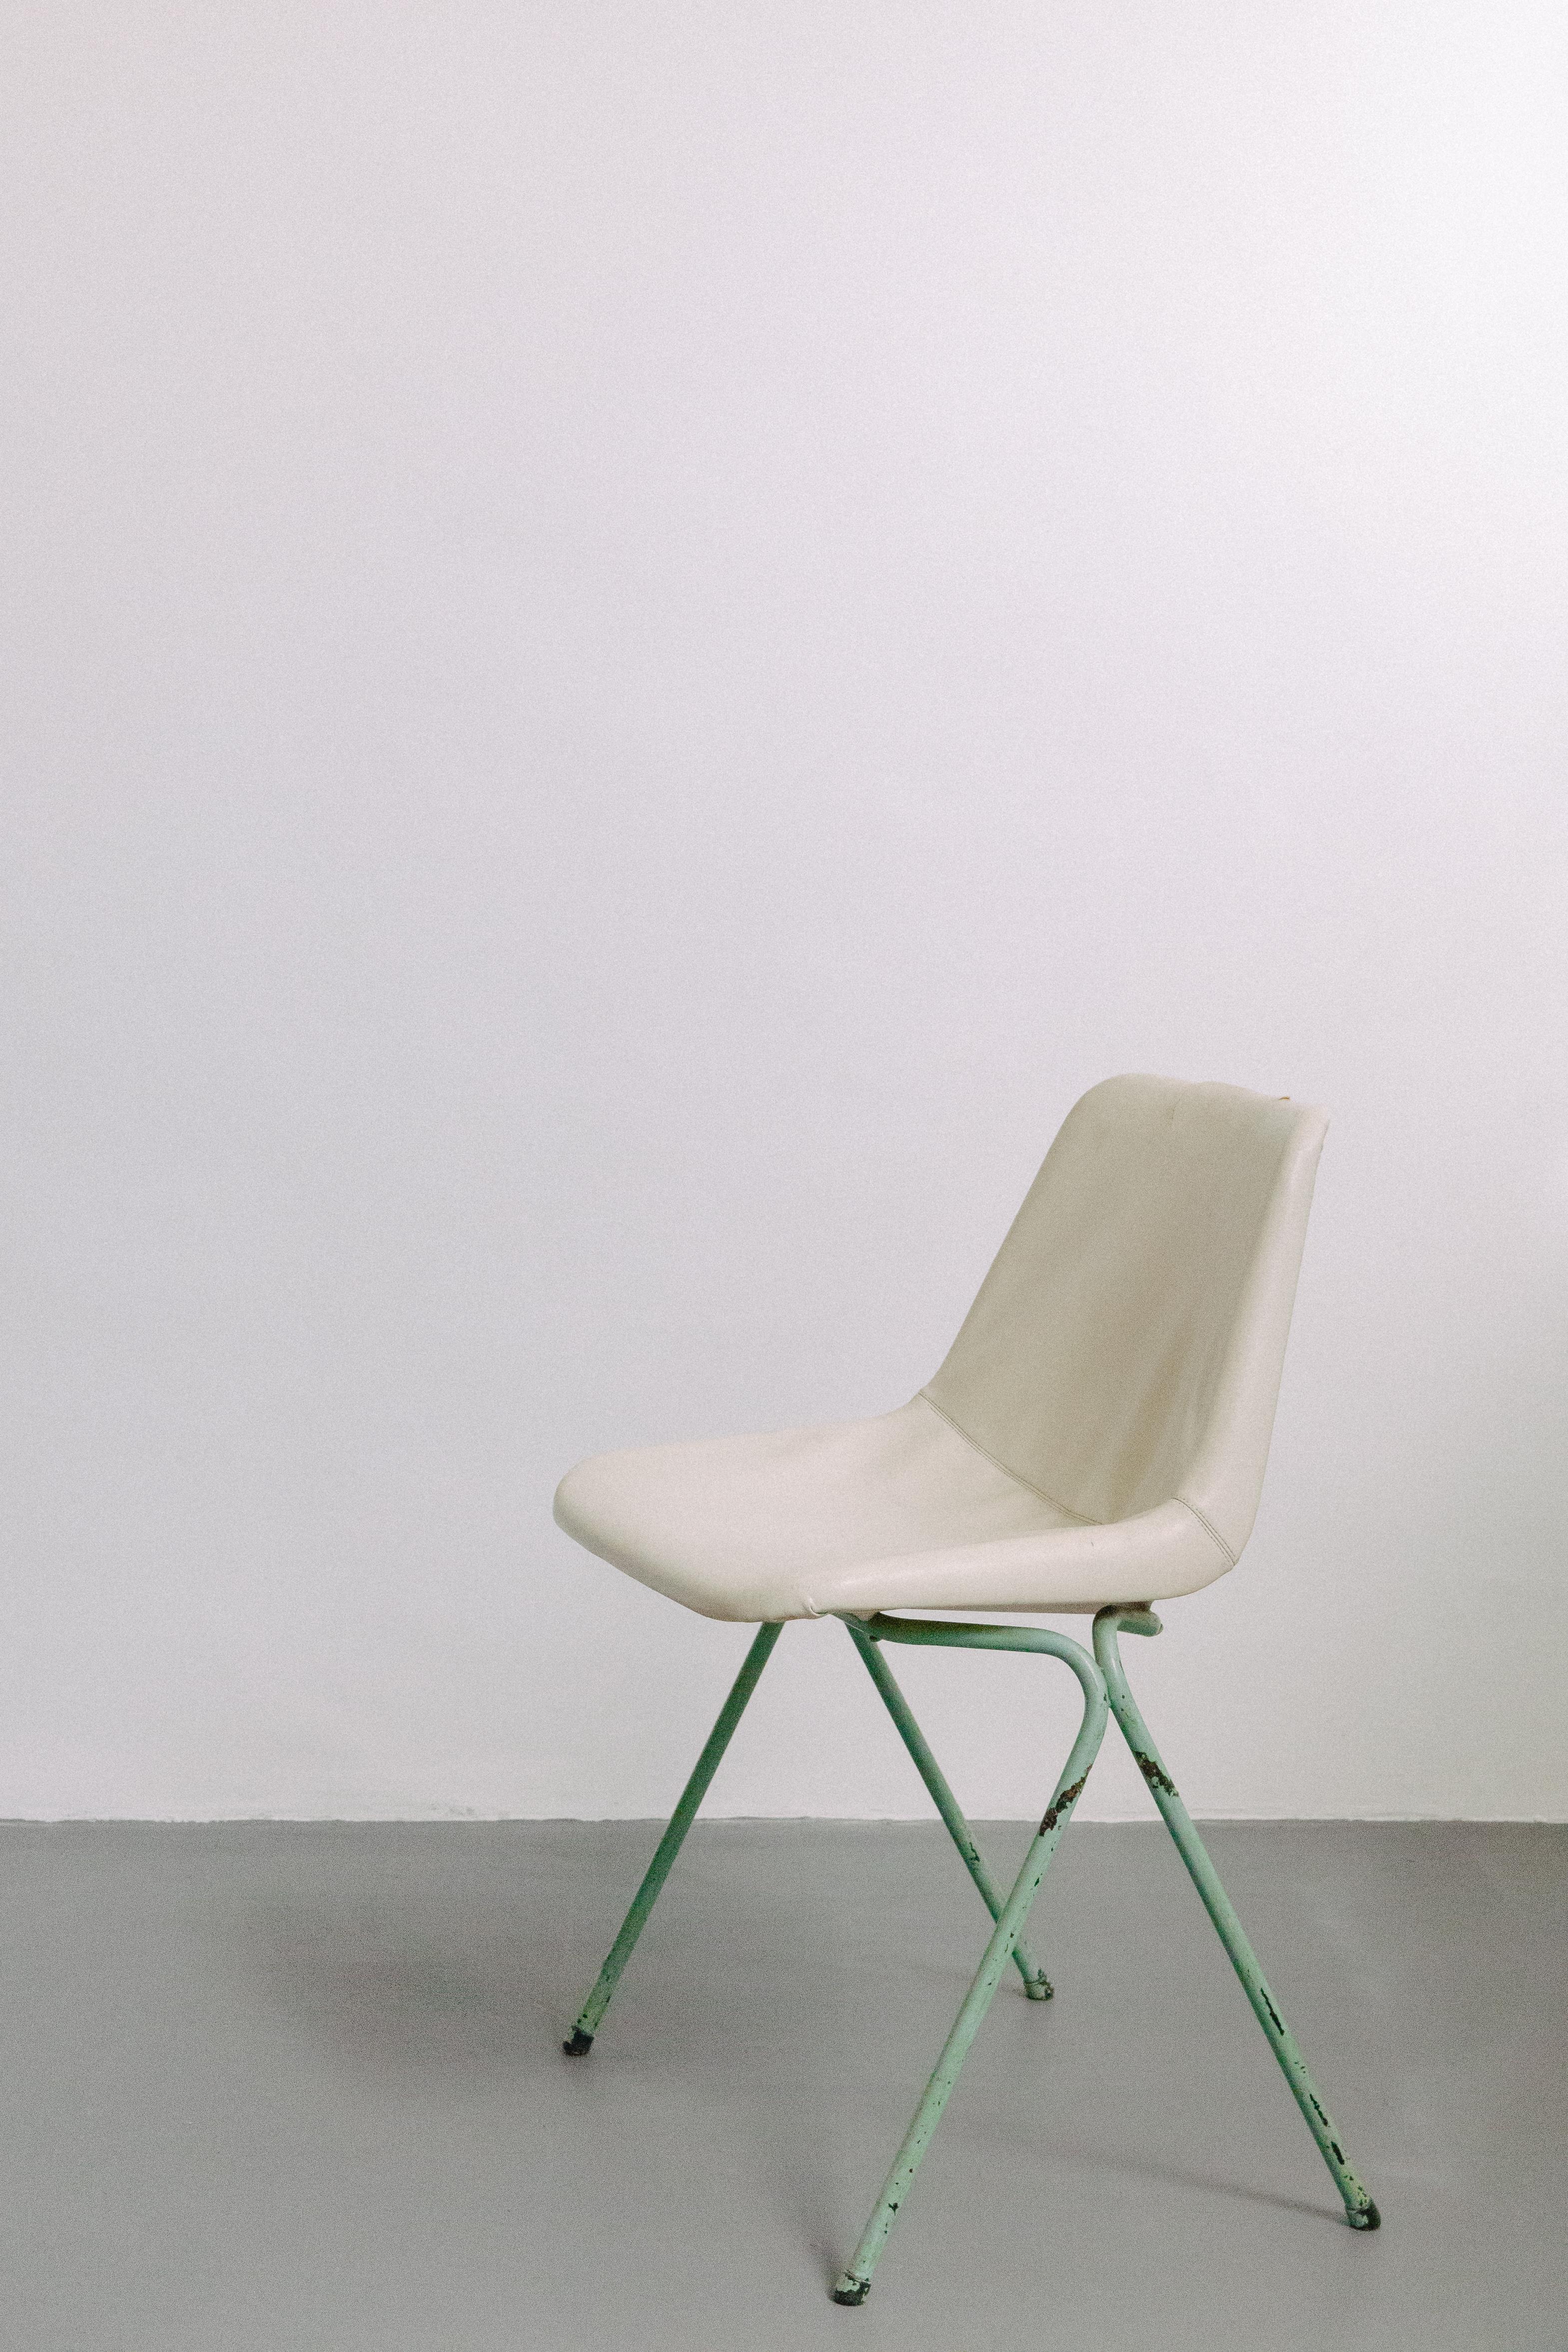 Mid-Century Modern Hille Chair Designed by Robin Day, Produced in Brazil by L'Atelier, circa 1968 For Sale